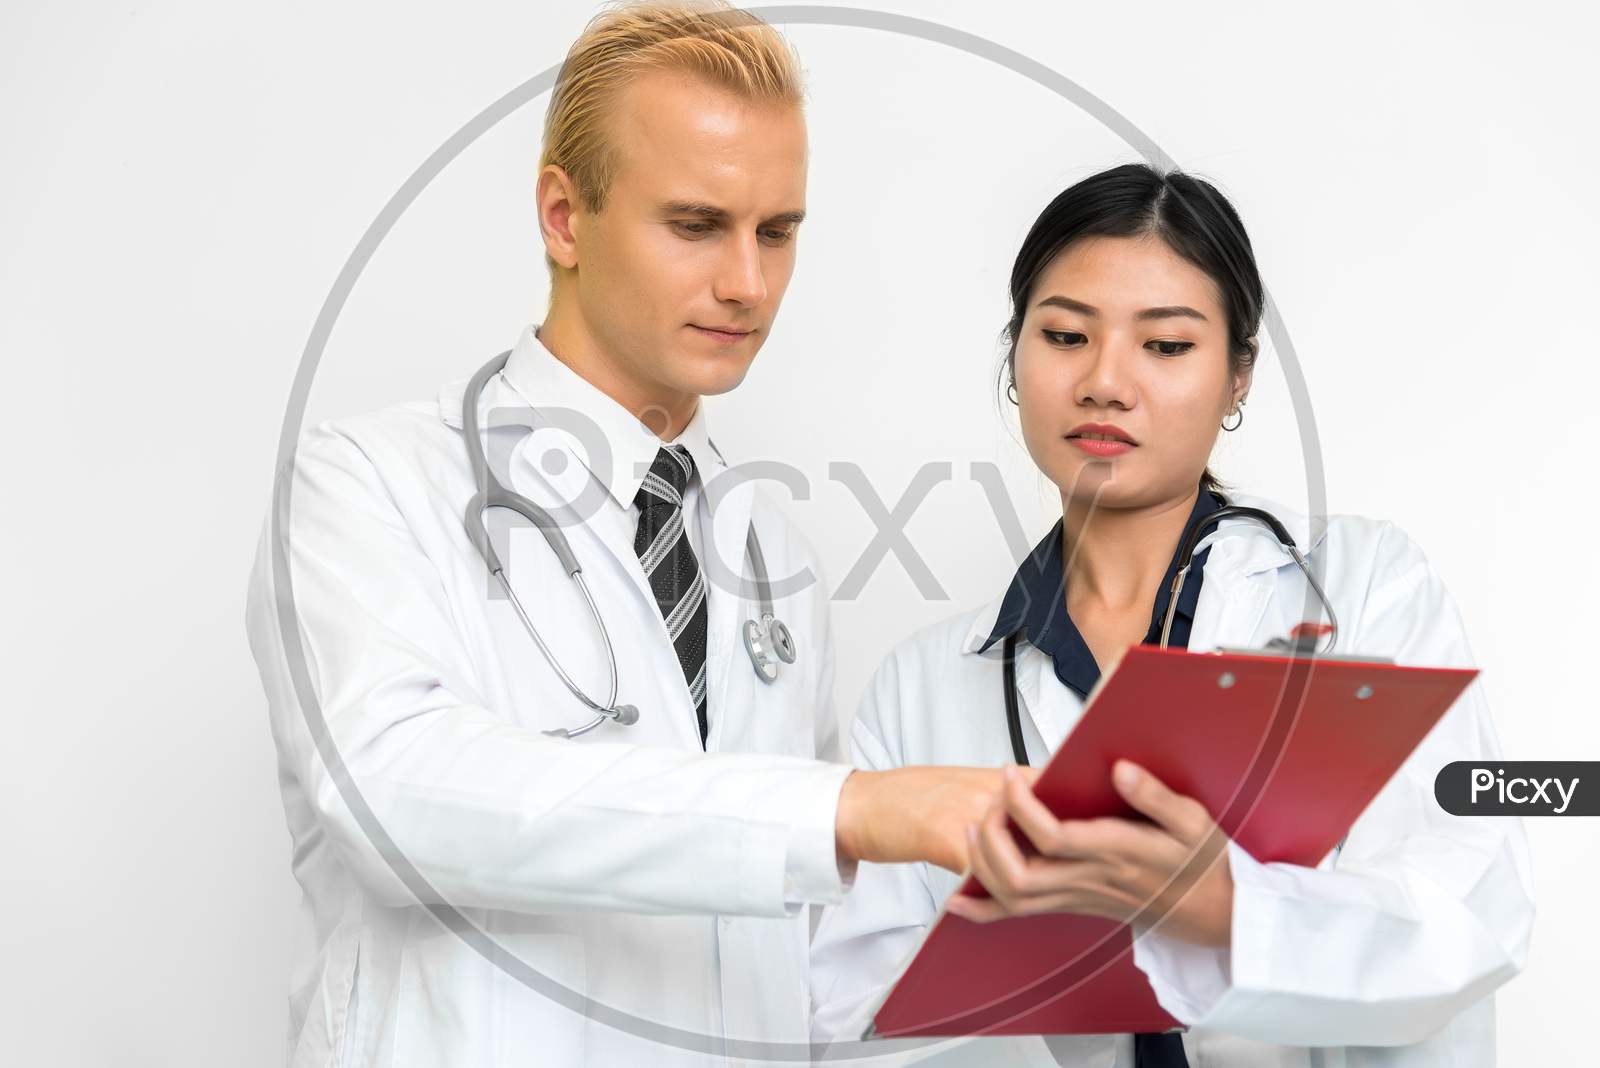 Doctor And Assistant Nurse Checking Patient Laboratory Test. Two Hospital Workers Discussing On Checking Result List. Medical And Healthcare Concept. People And Lifestyles Theme.